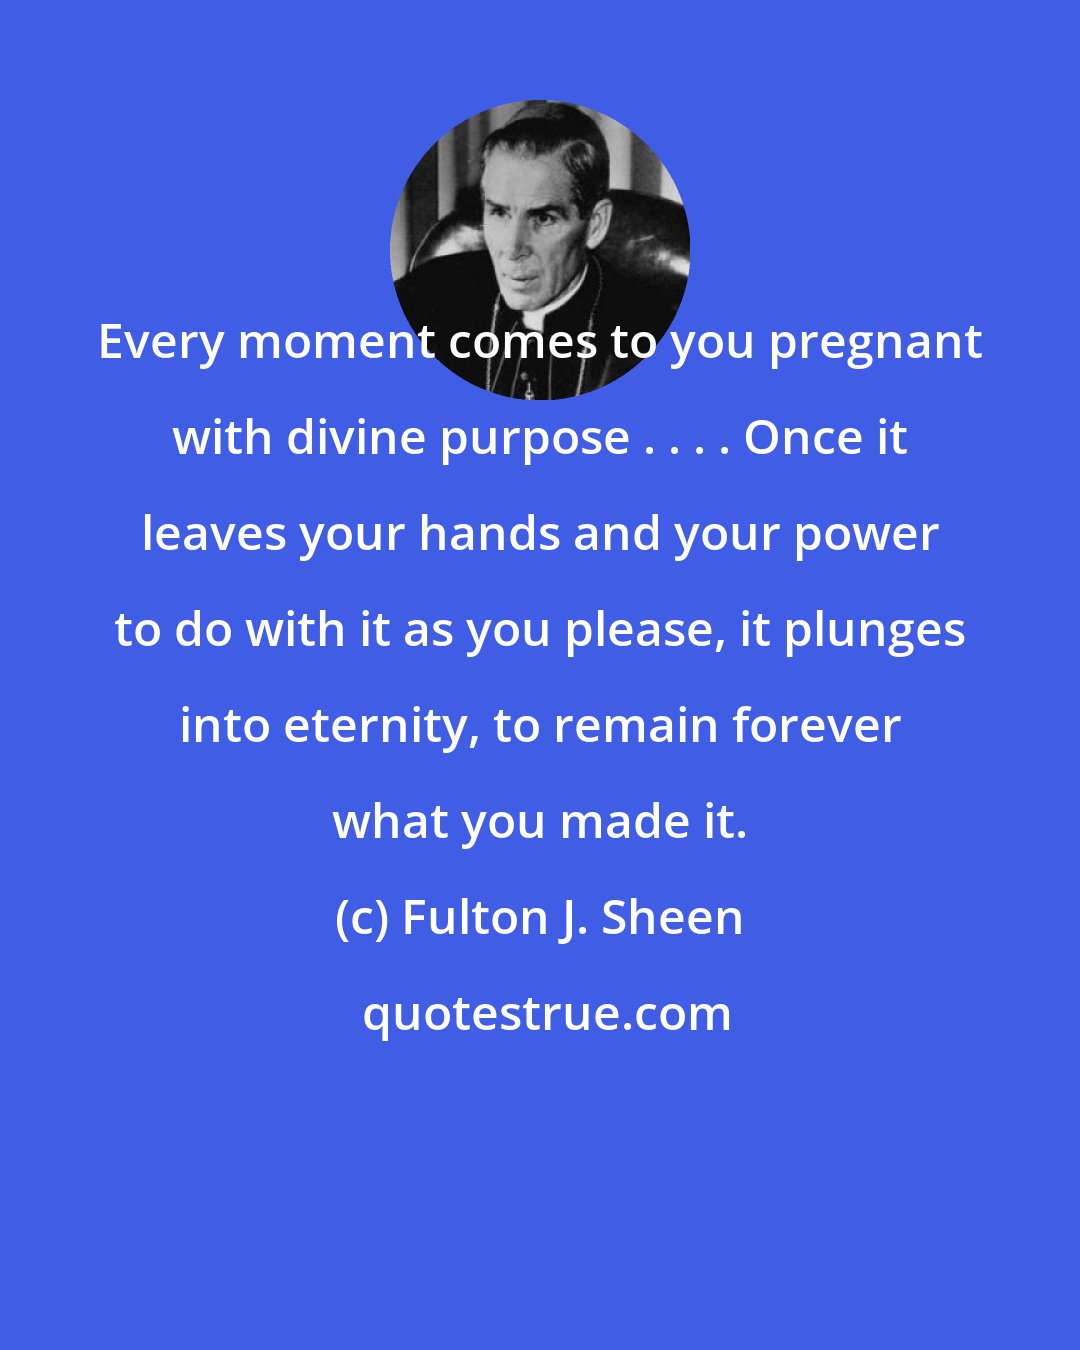 Fulton J. Sheen: Every moment comes to you pregnant with divine purpose . . . . Once it leaves your hands and your power to do with it as you please, it plunges into eternity, to remain forever what you made it.